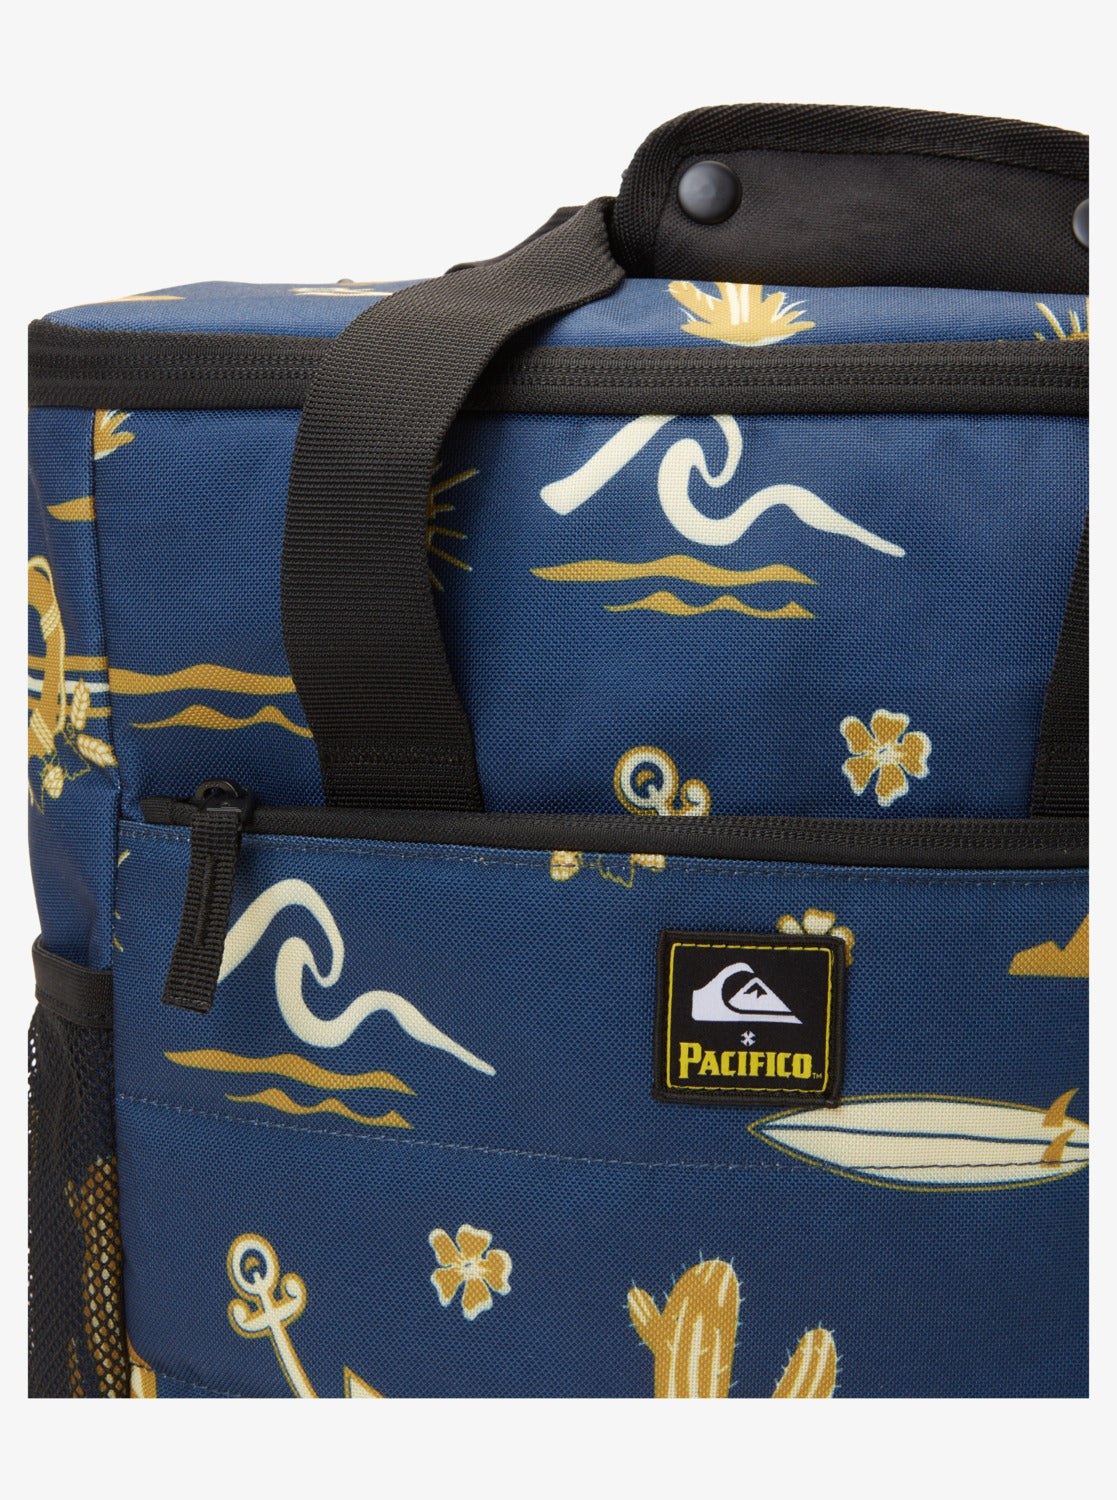 Quiksilver X  Pacifico Seabeach Cooler Backpack.